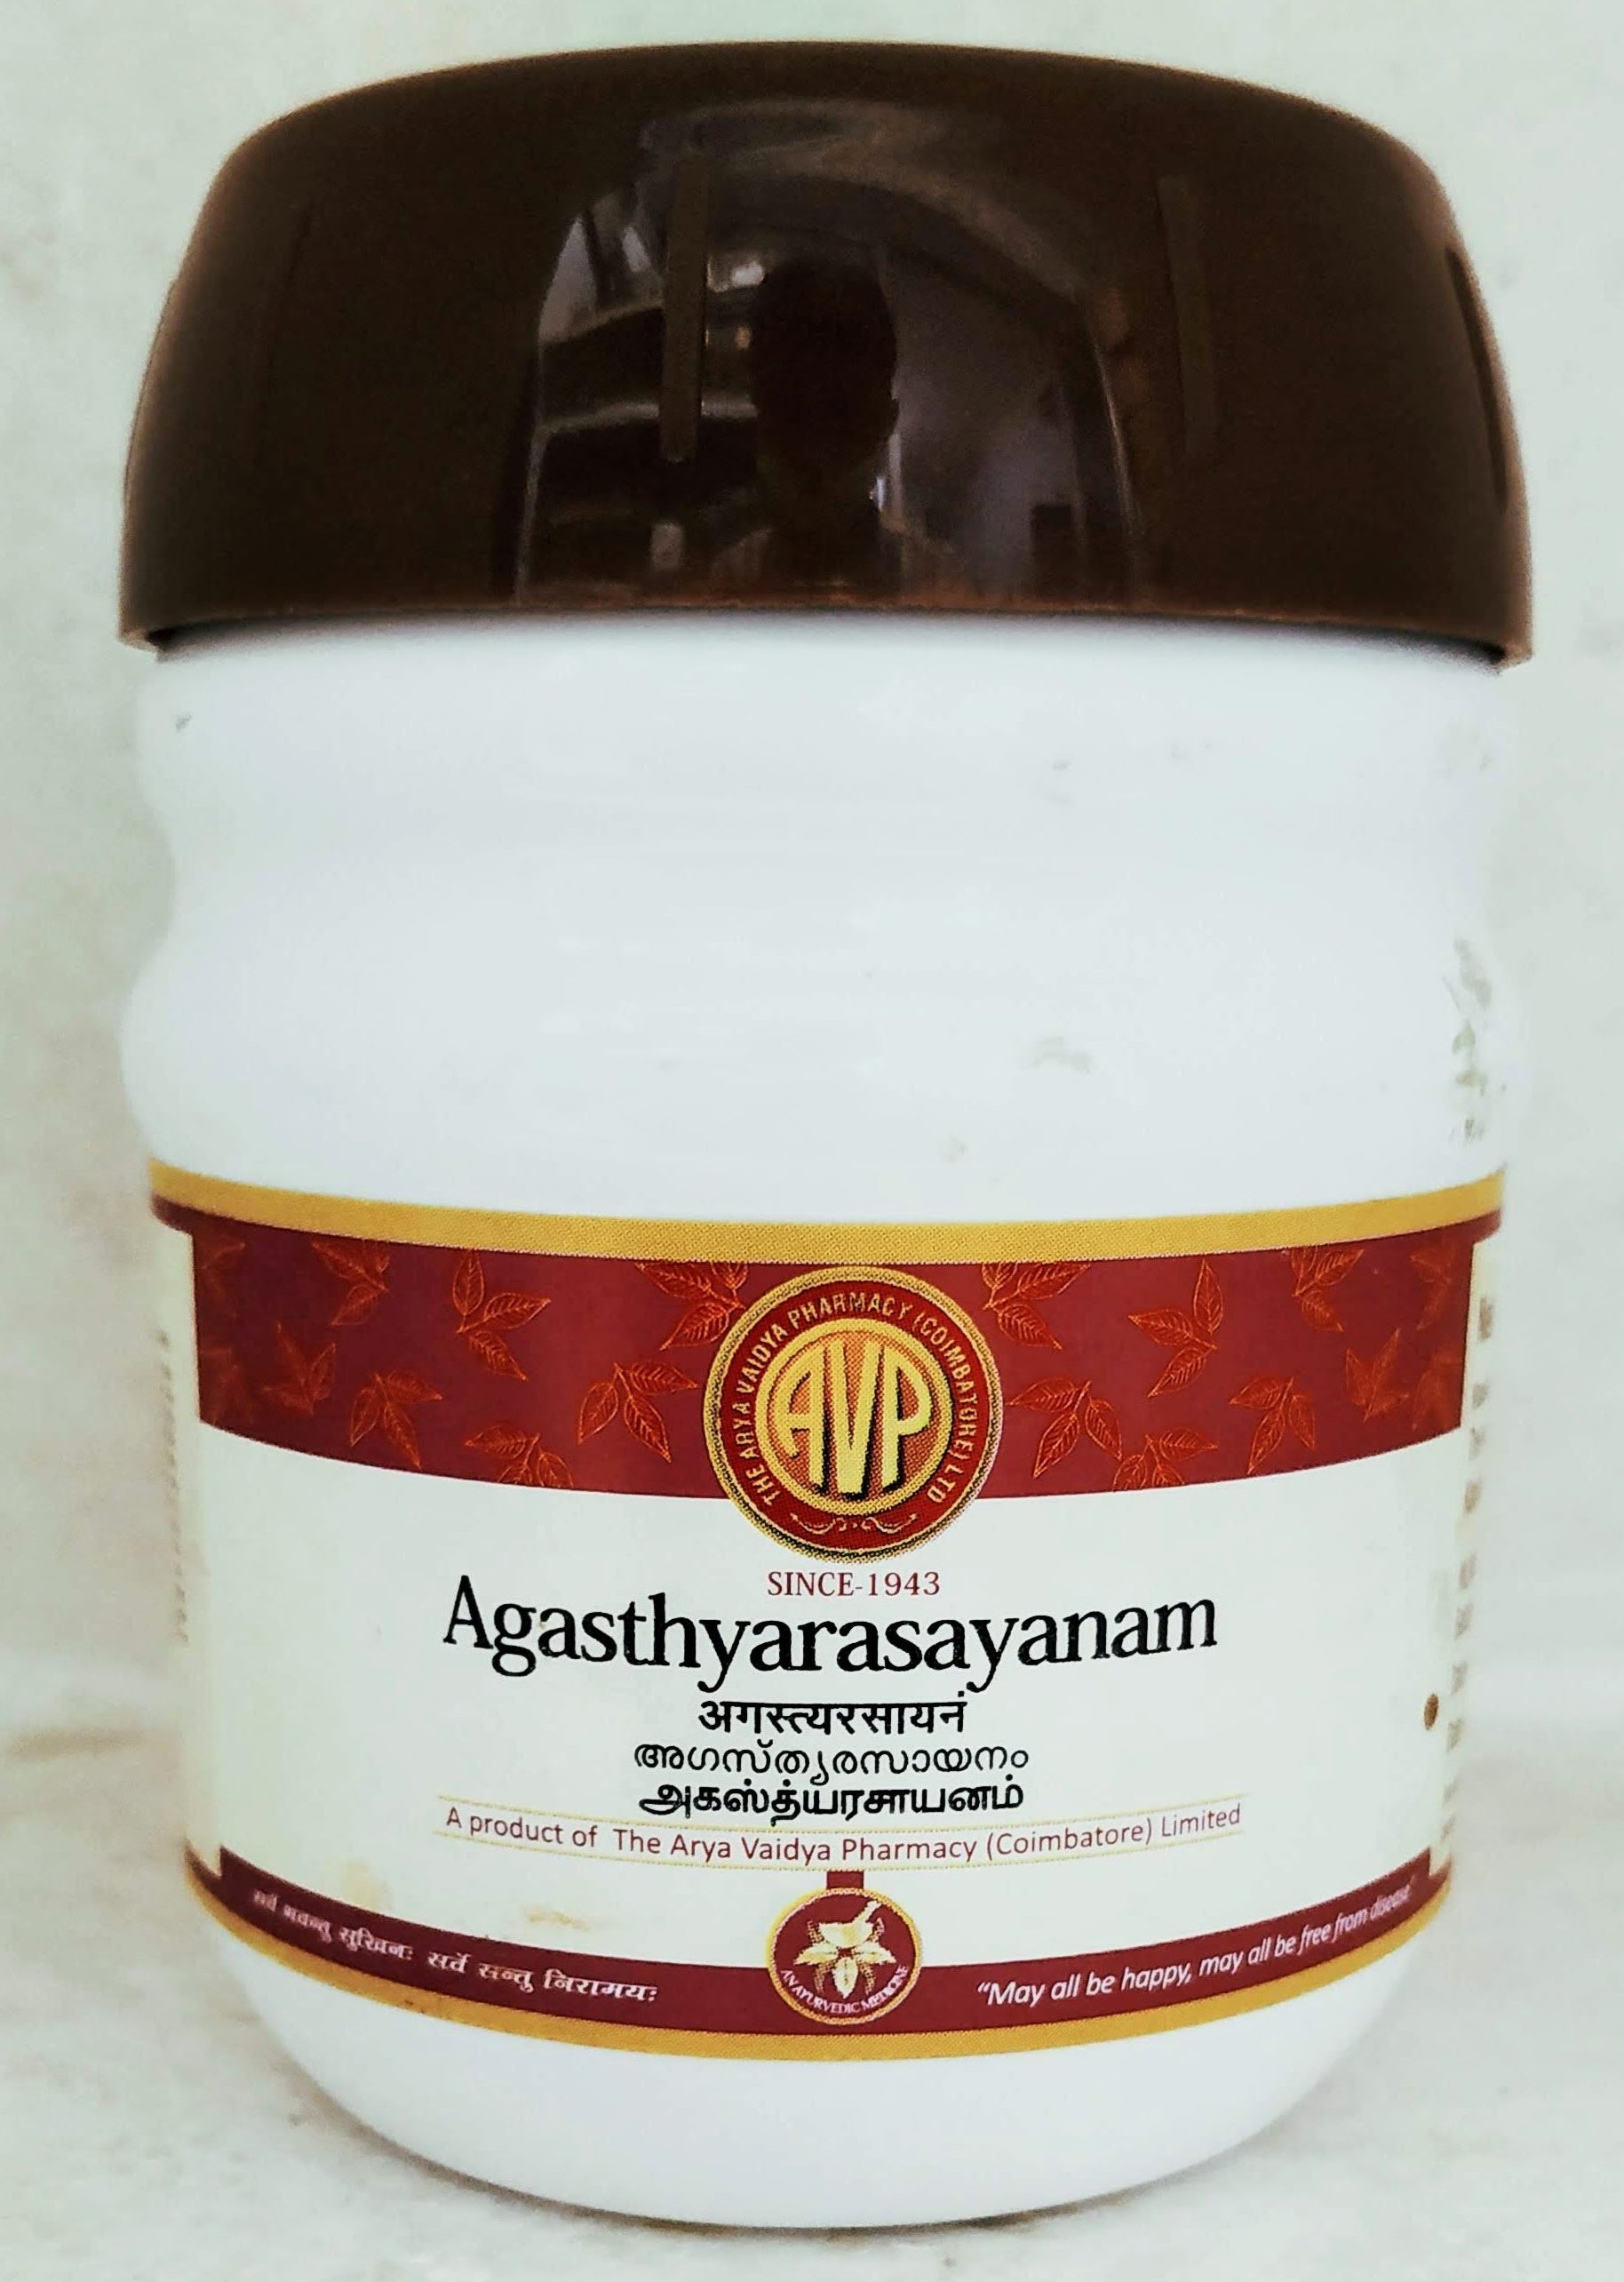 Shop Agasthya Rasayanam 200gm at price 85.00 from AVP Online - Ayush Care